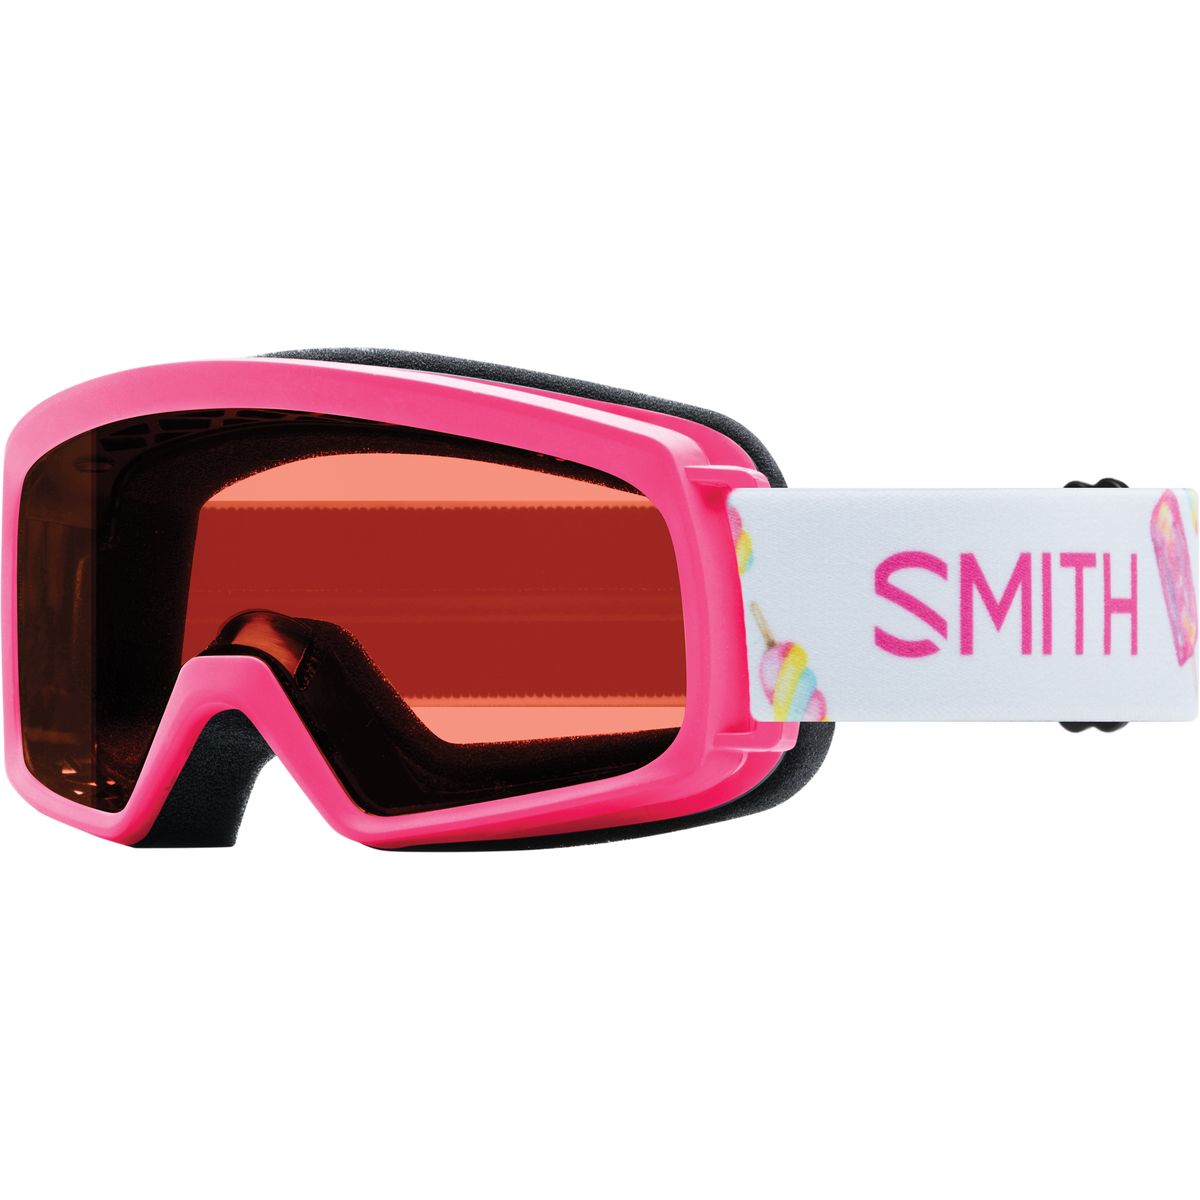 Smith Rascal Goggles - Kids' Pink Popsicles/RC36